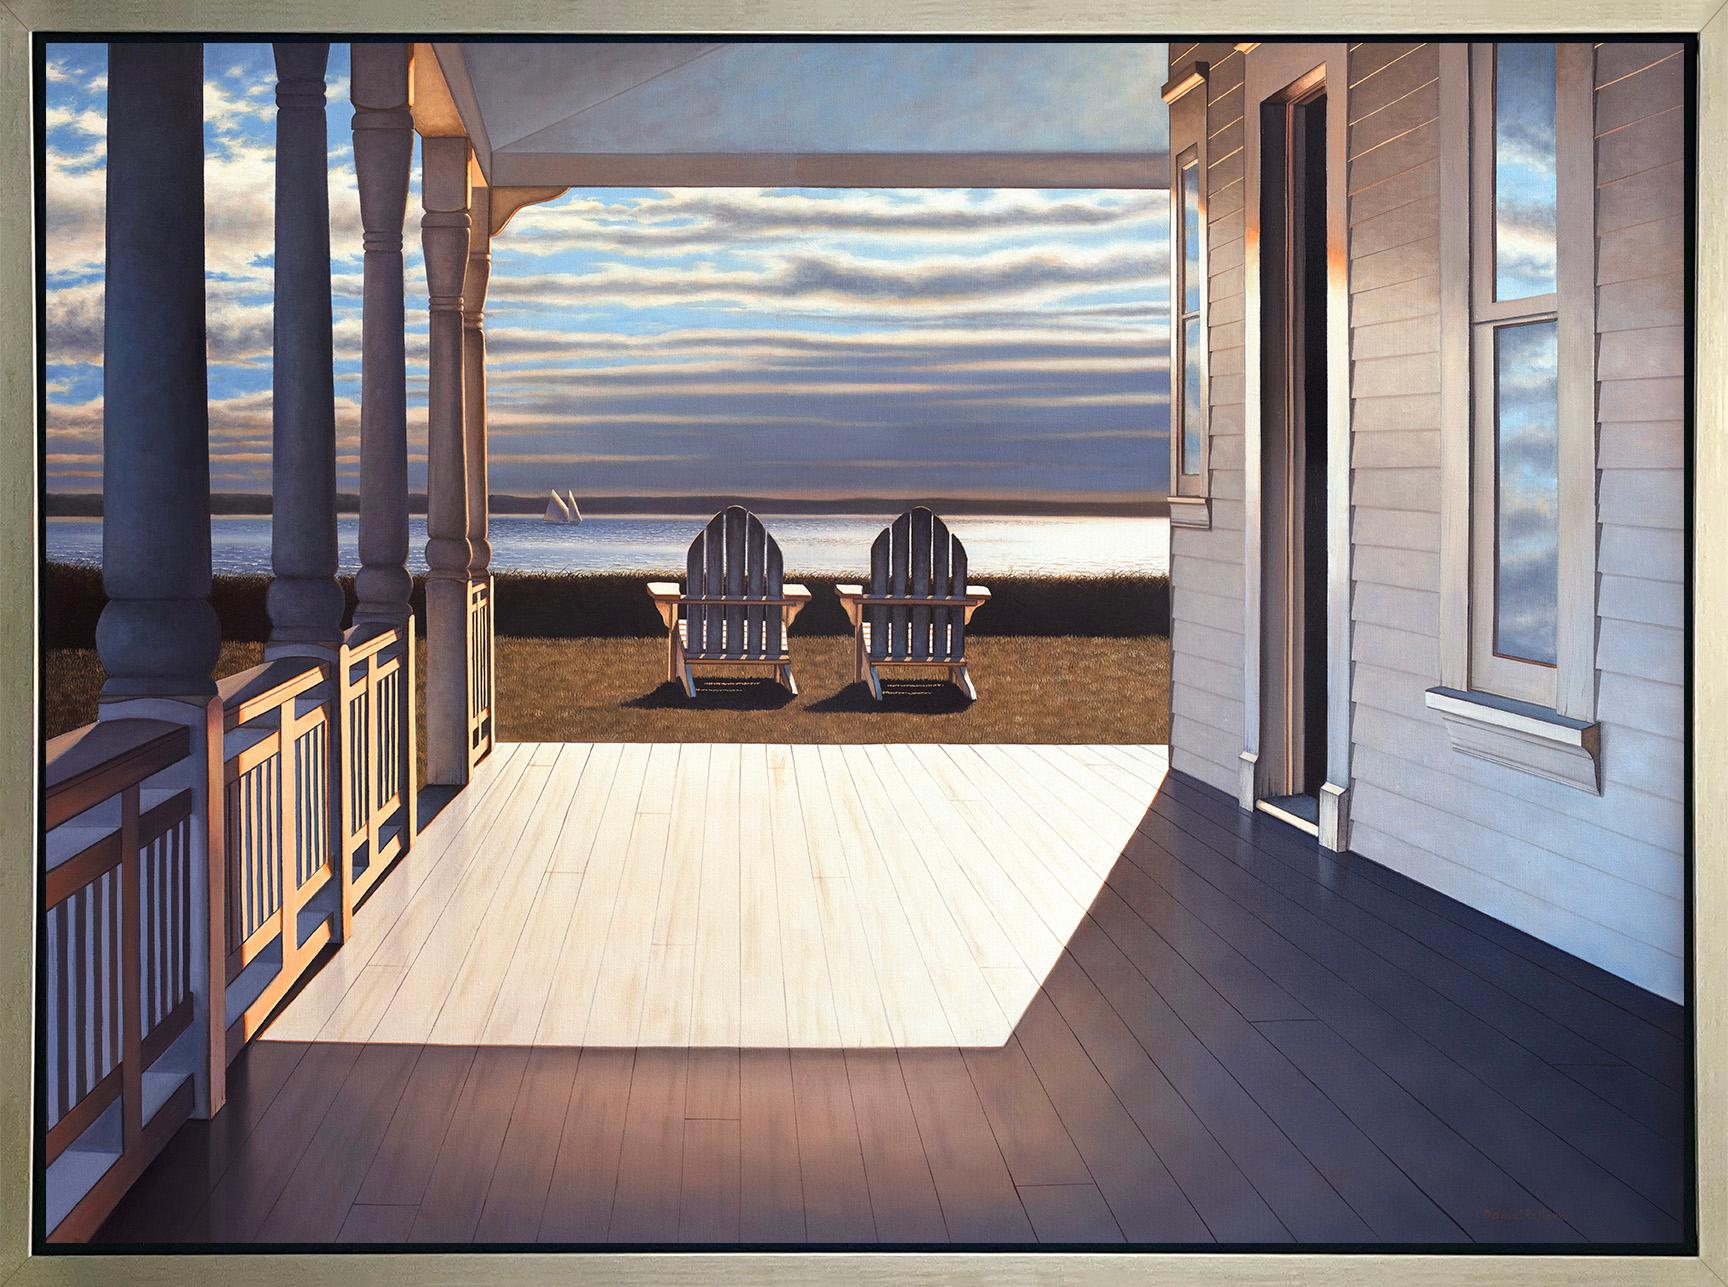 Daniel Pollera Landscape Print - "Passing Time, " Framed Limited Edition Giclee Print, 48" x 60"